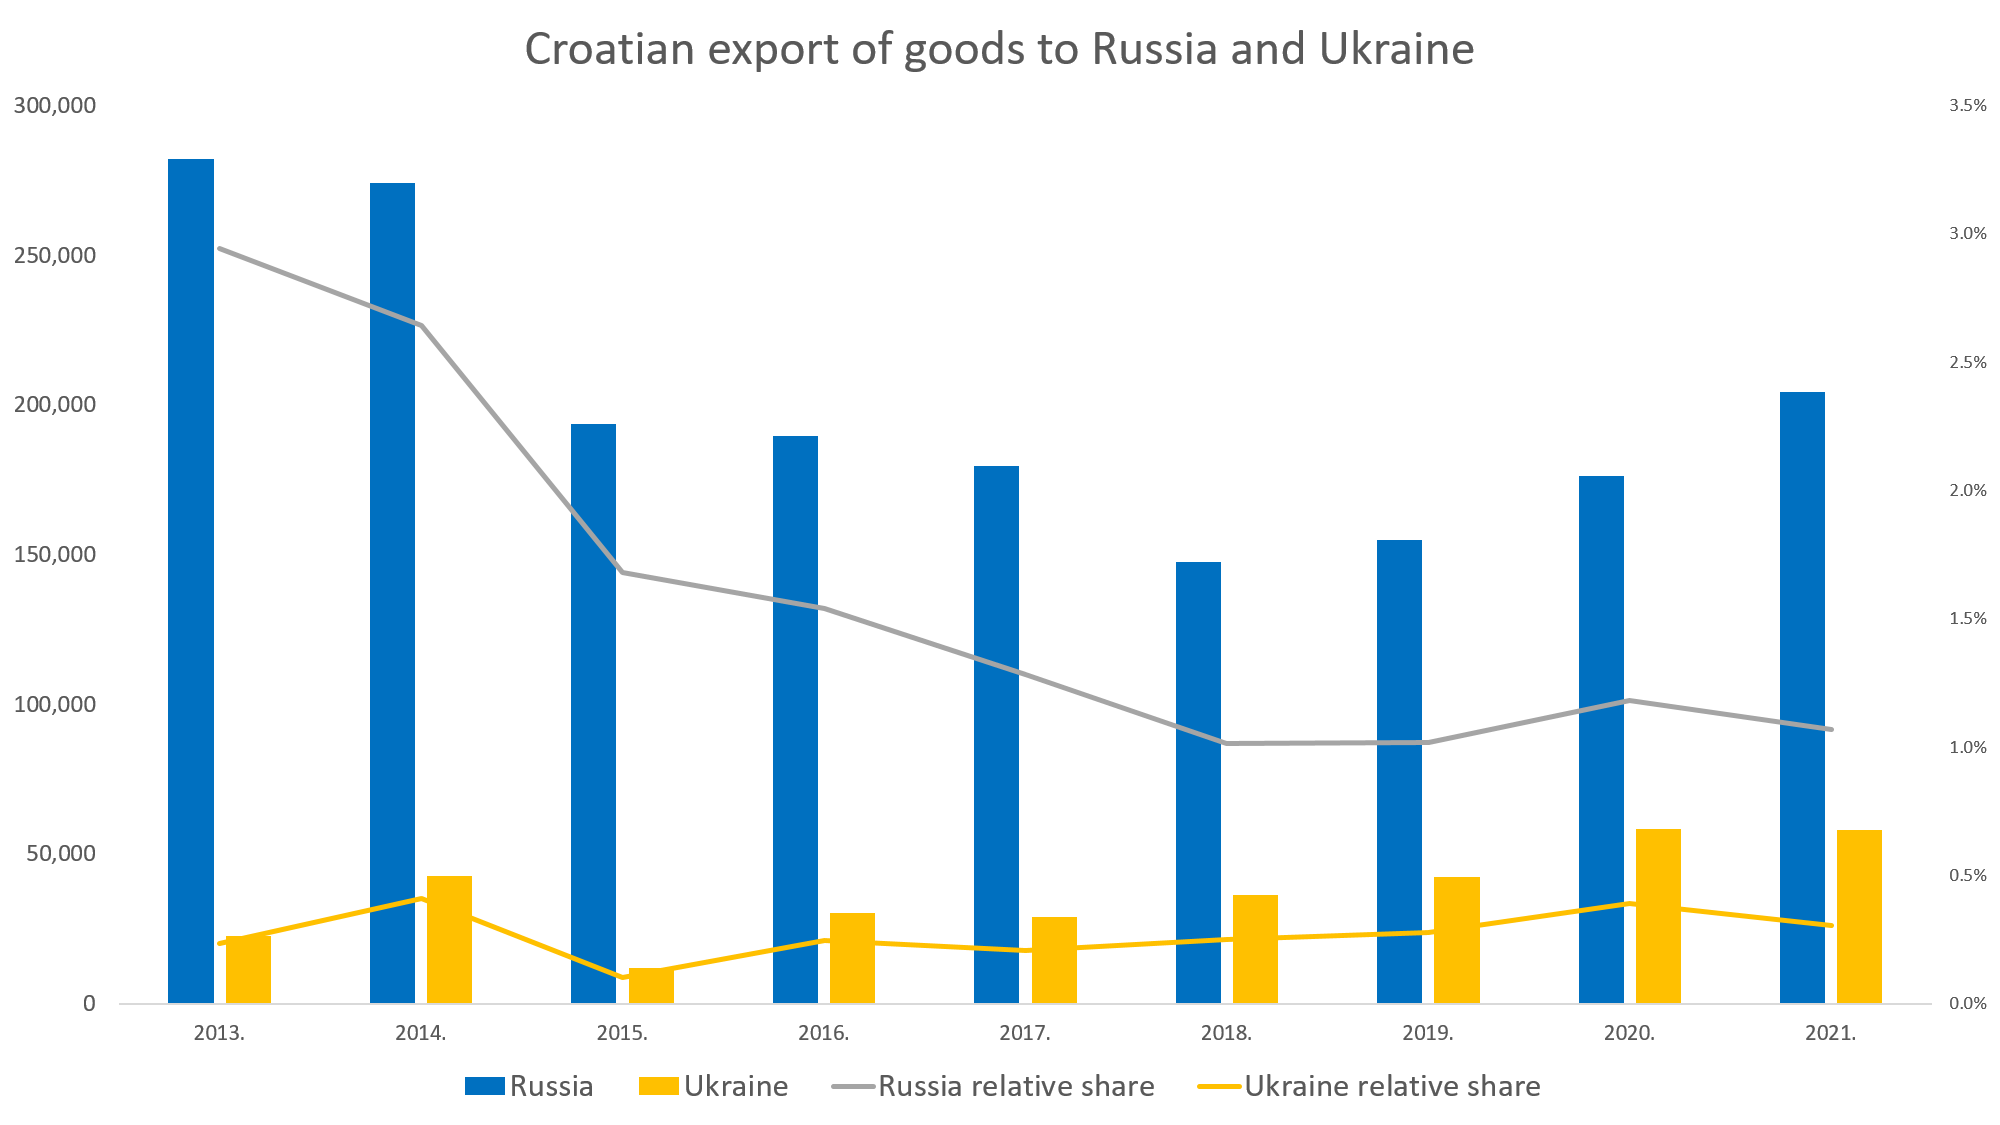 Croatian-foreign-frade-of-goods-with-russia-and-ukraine-1.png